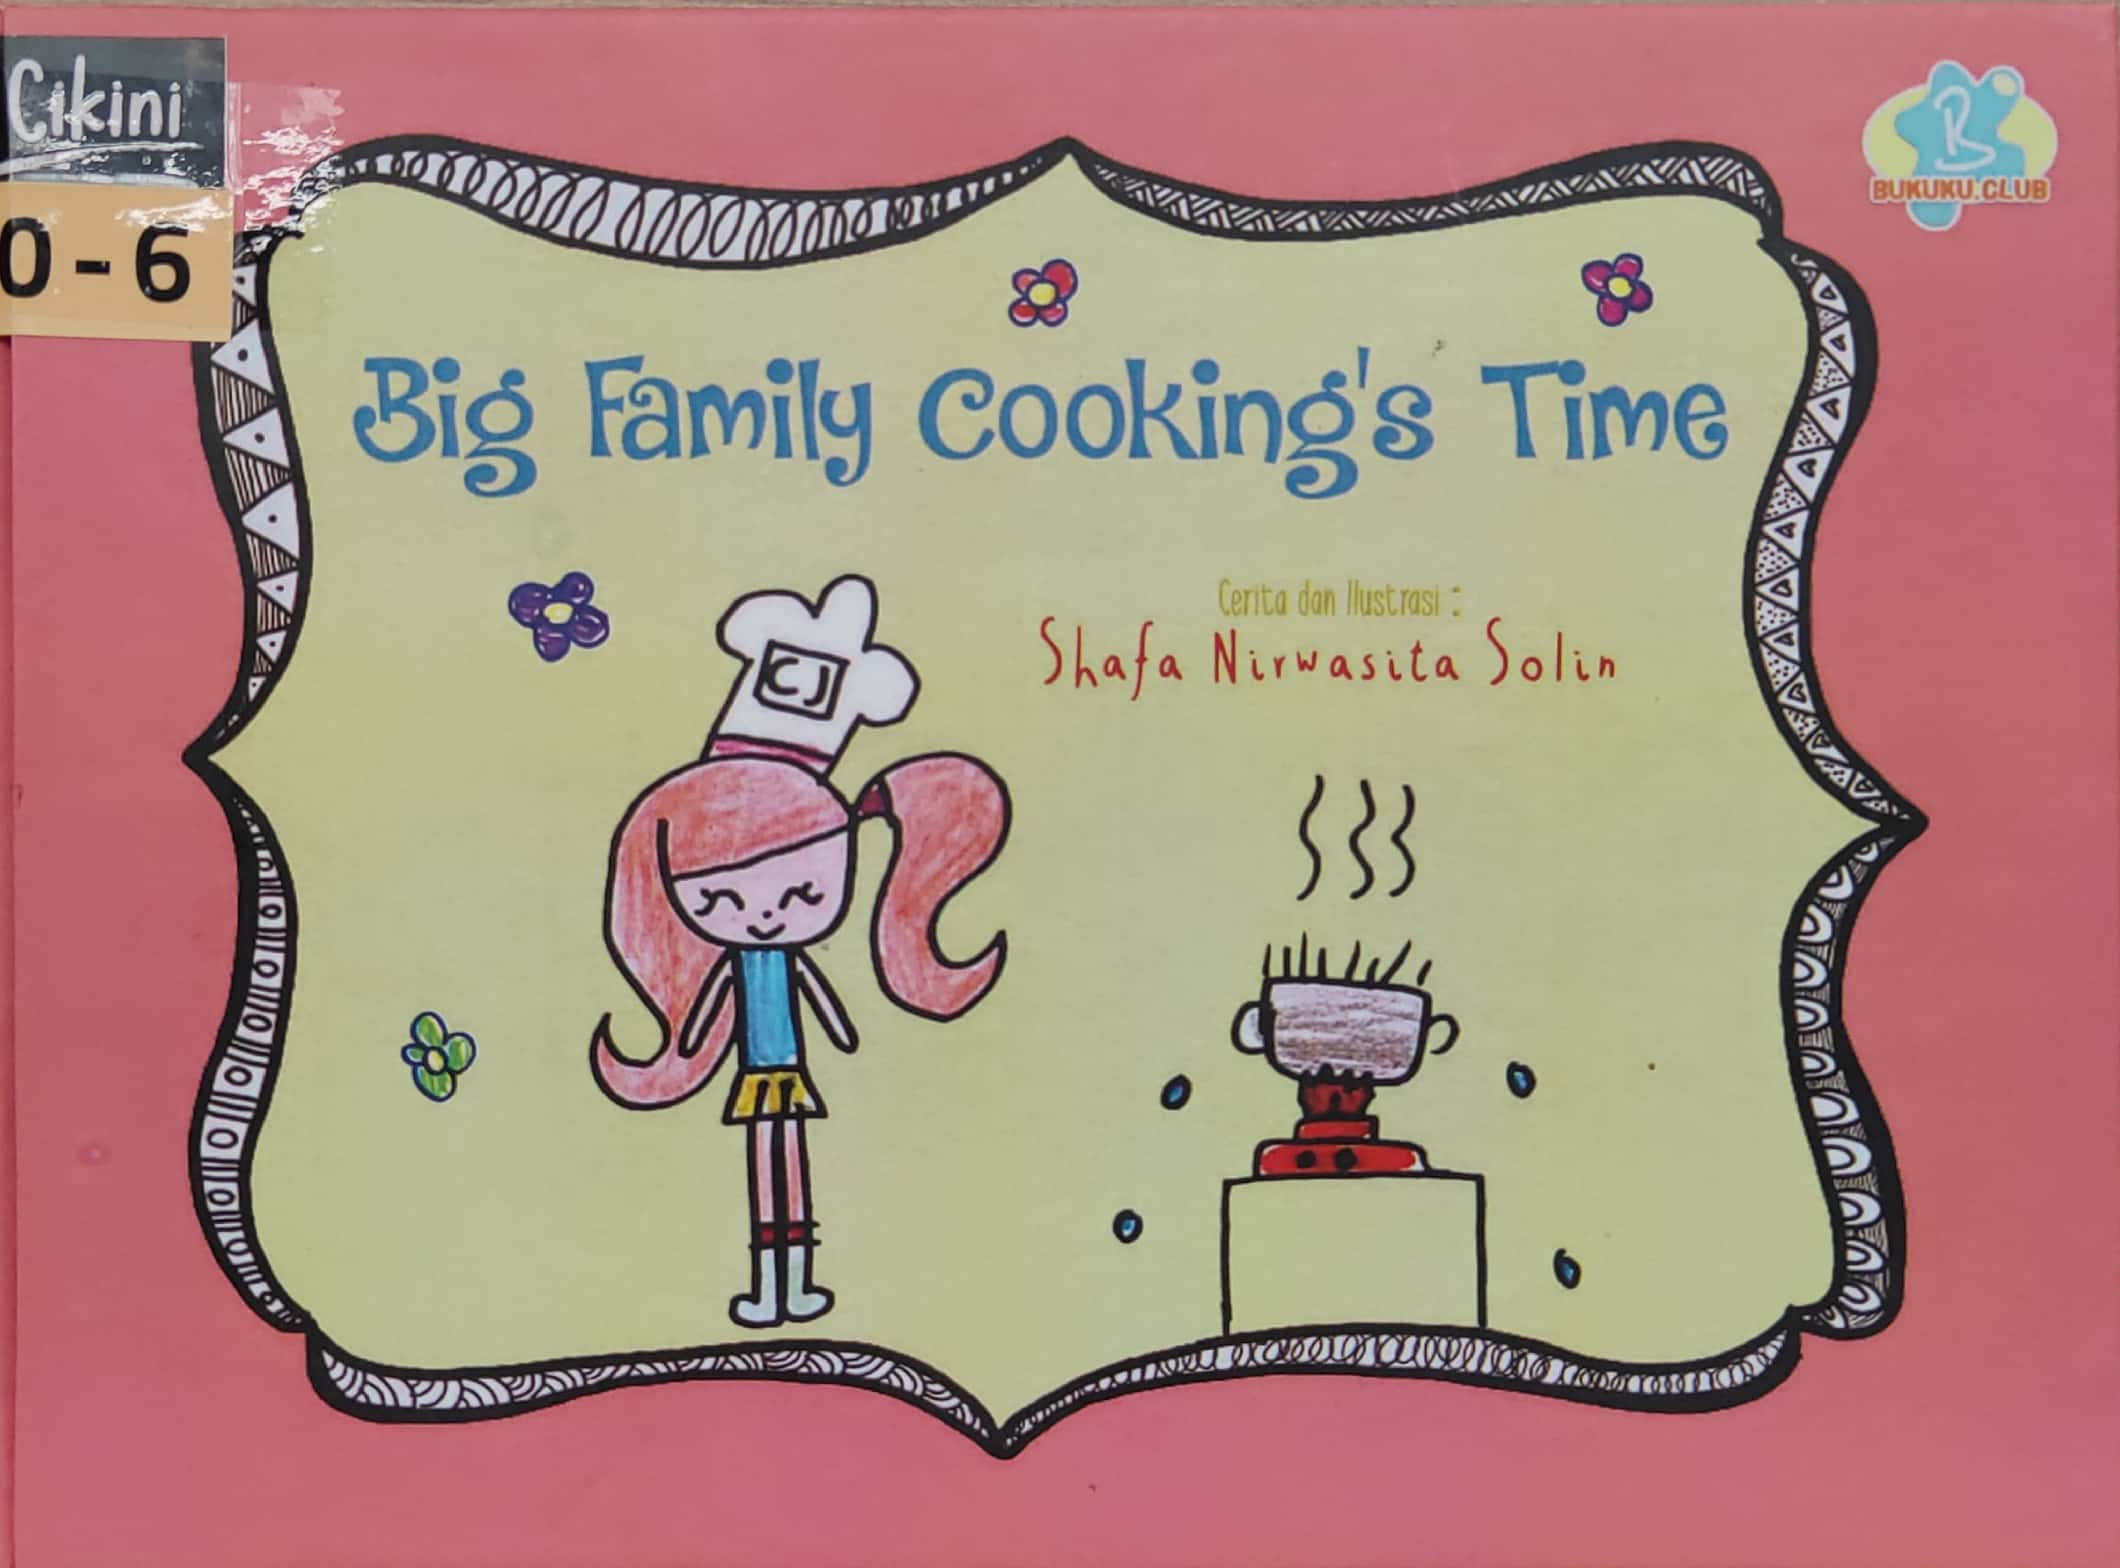 Big family cooking's time